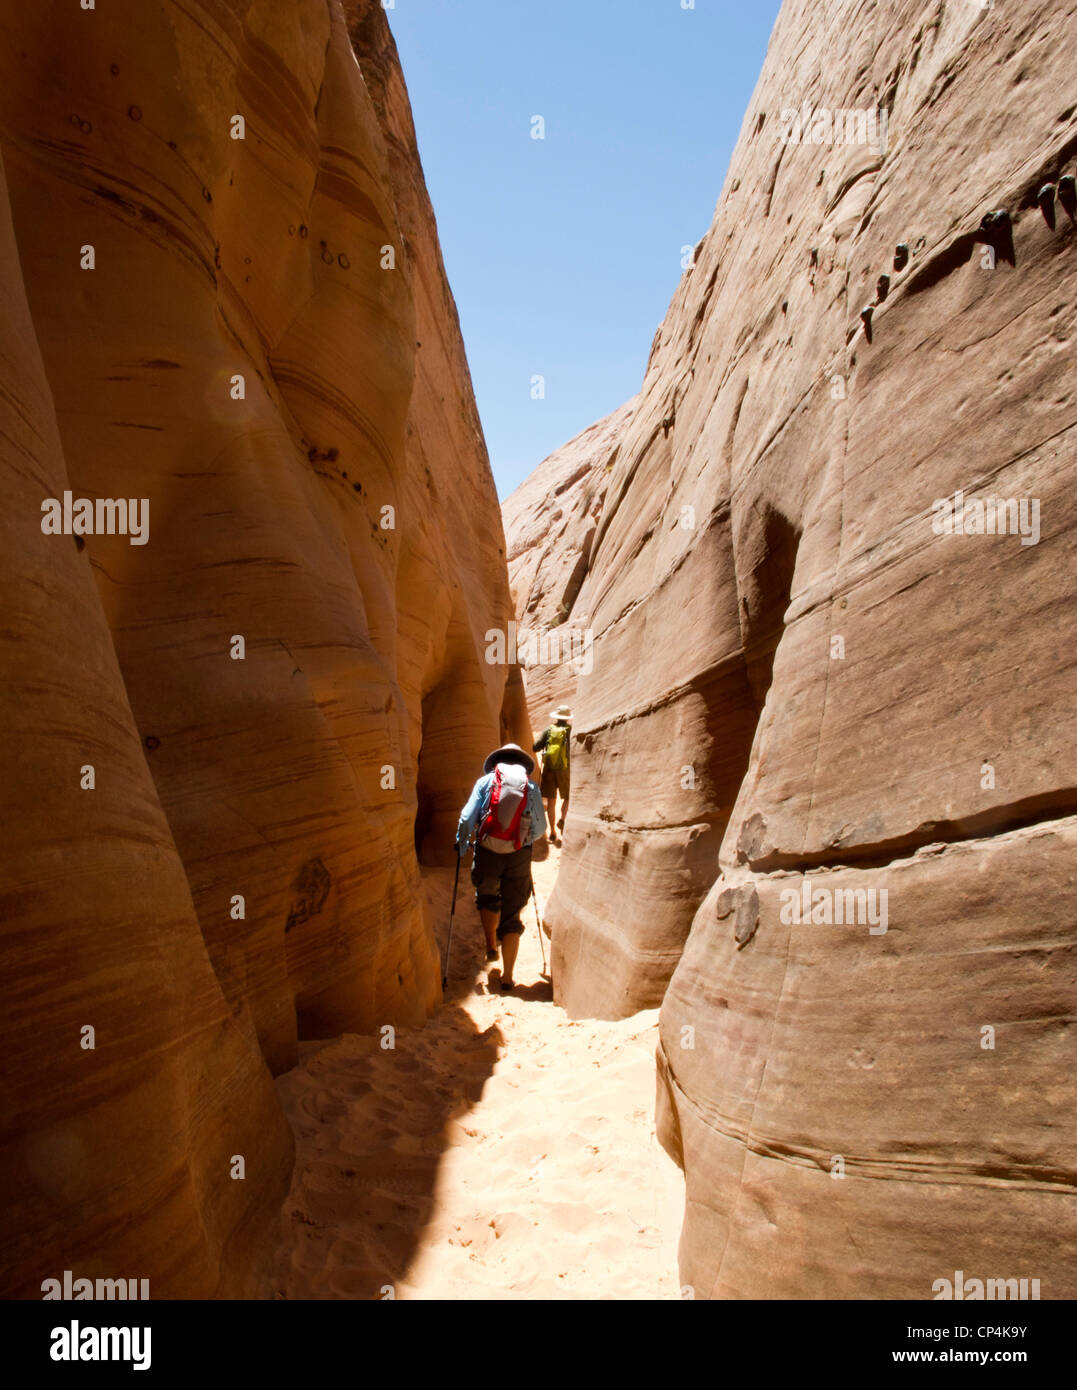 Hikers in a slot canyon in Grand Staircase-Escalante National Monument, Utah Stock Photo